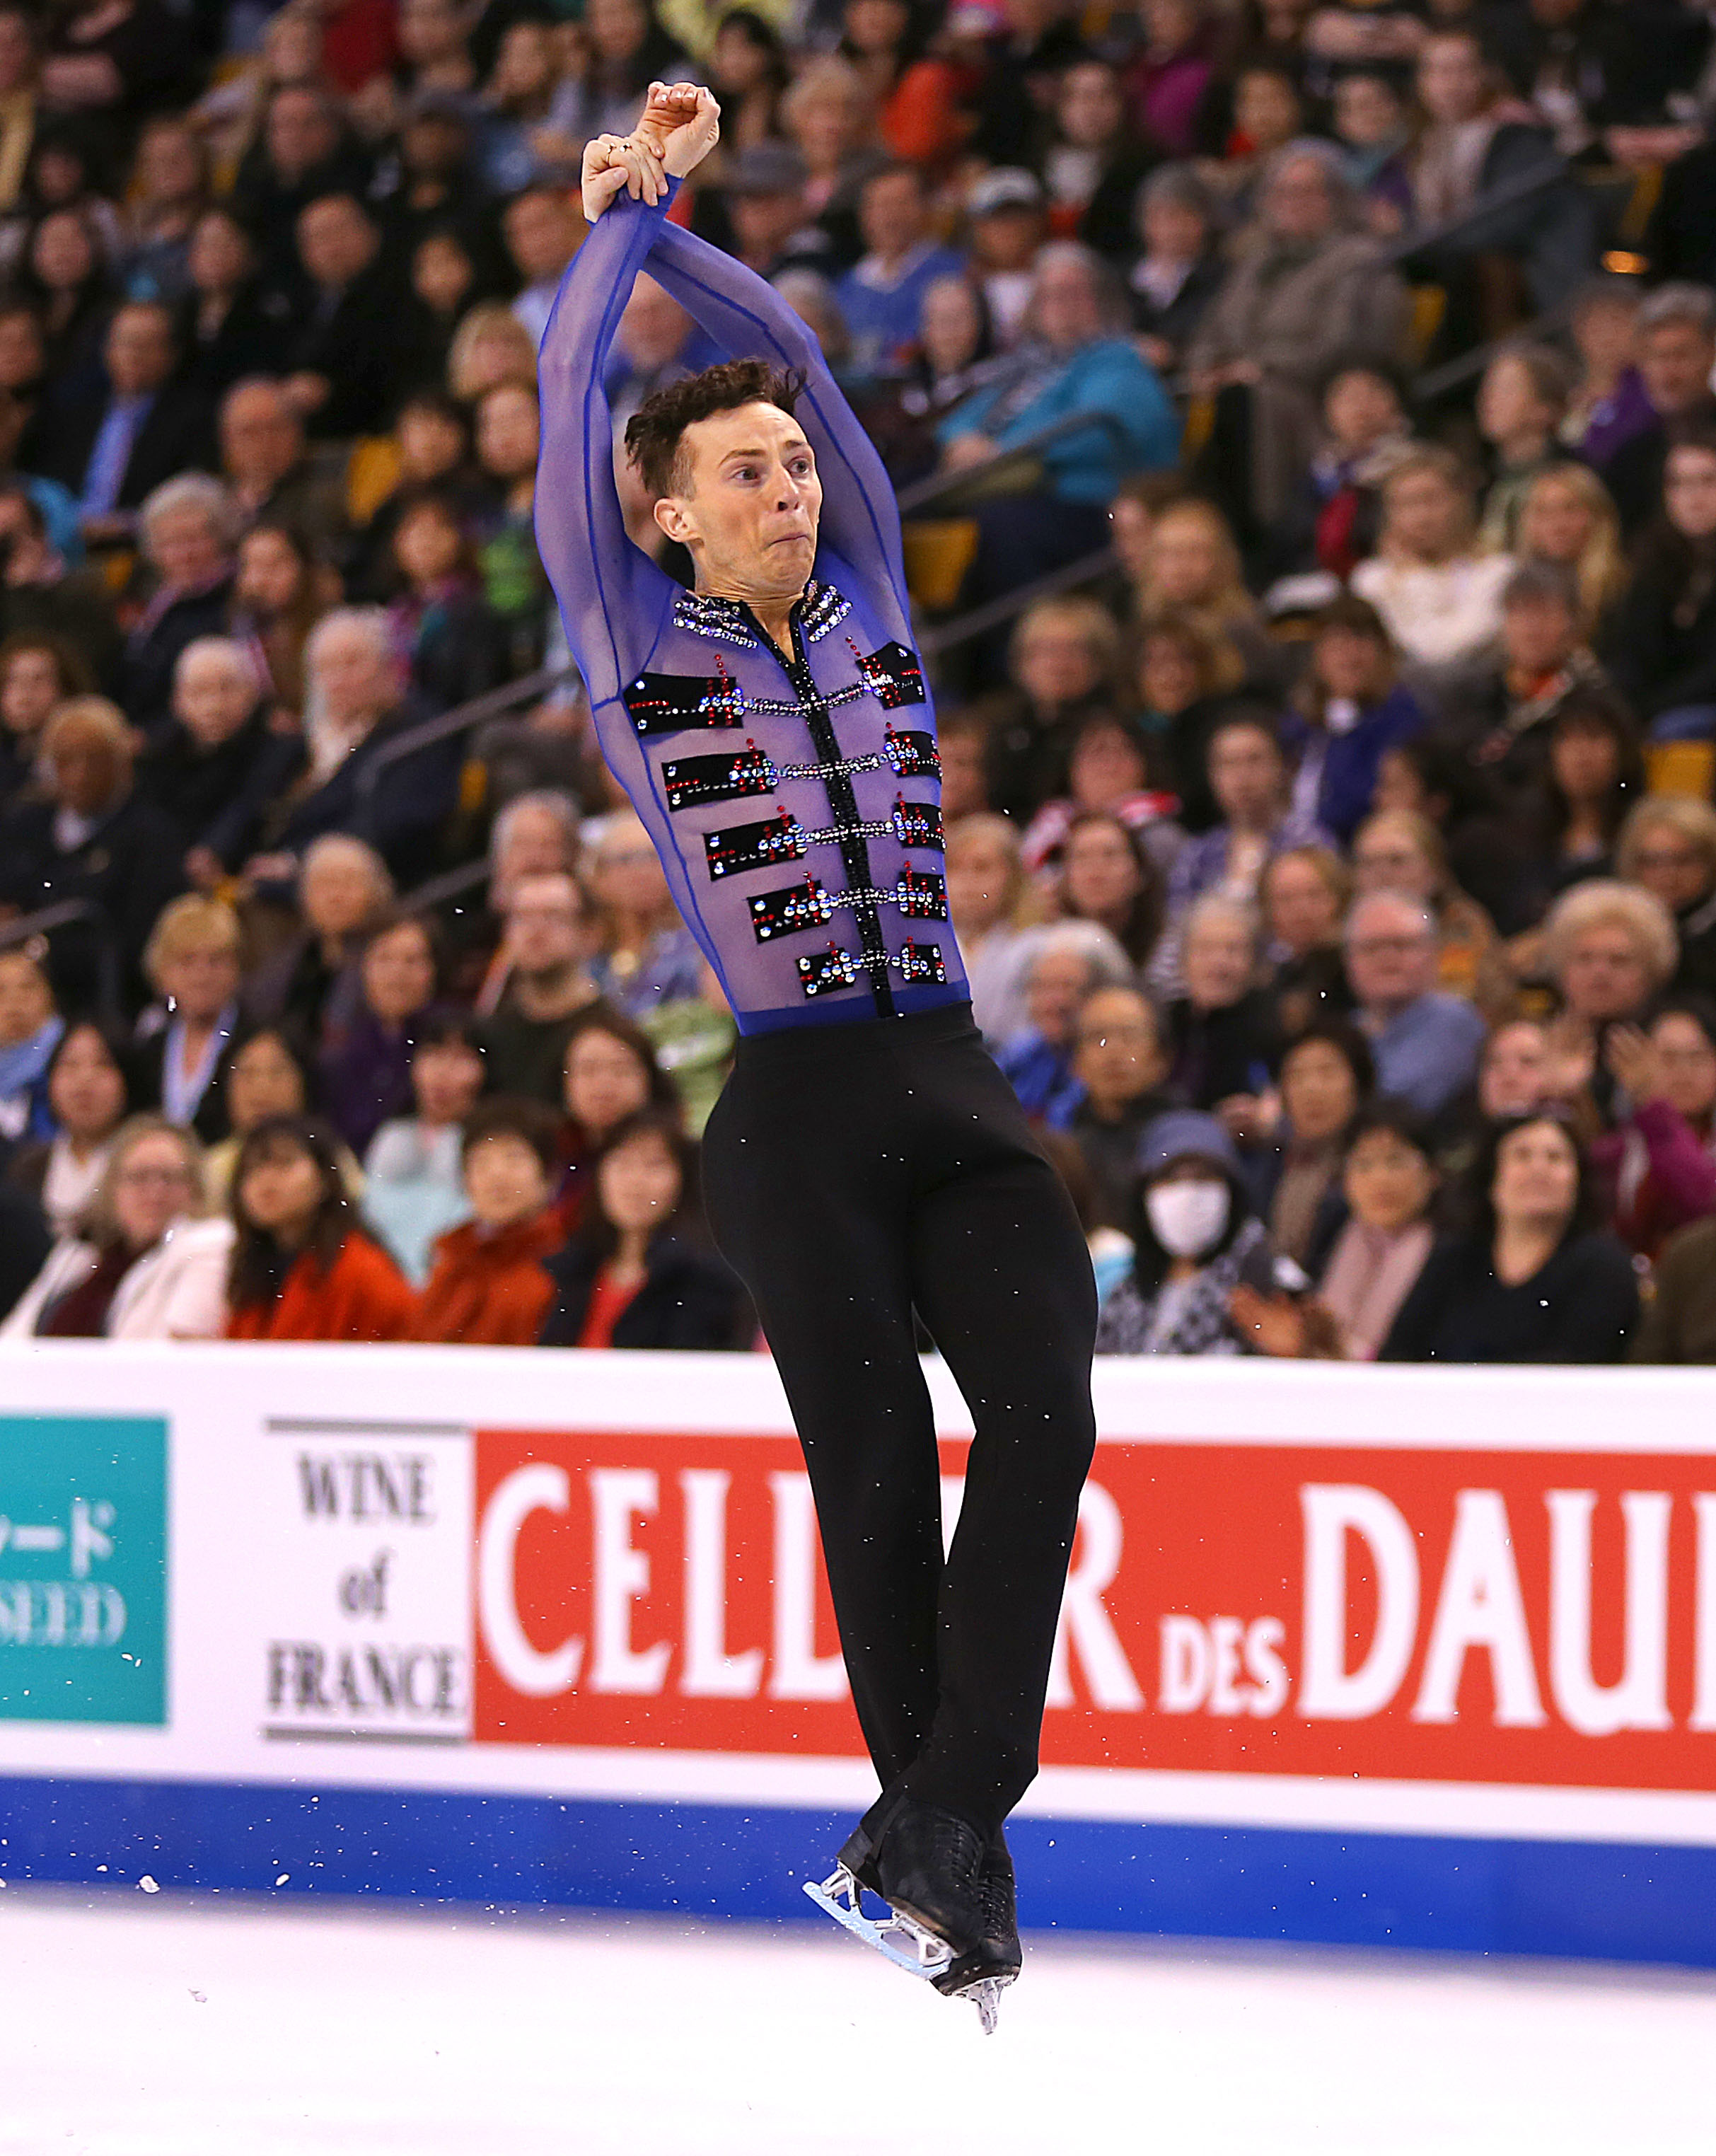 Adam Rippon from the United States jumps during the Mens Free Skate Program competition of the World Figure Skating Championships at TD Garden in Boston on April 1, 2016. (Boston Globe—Boston Globe via Getty Images)